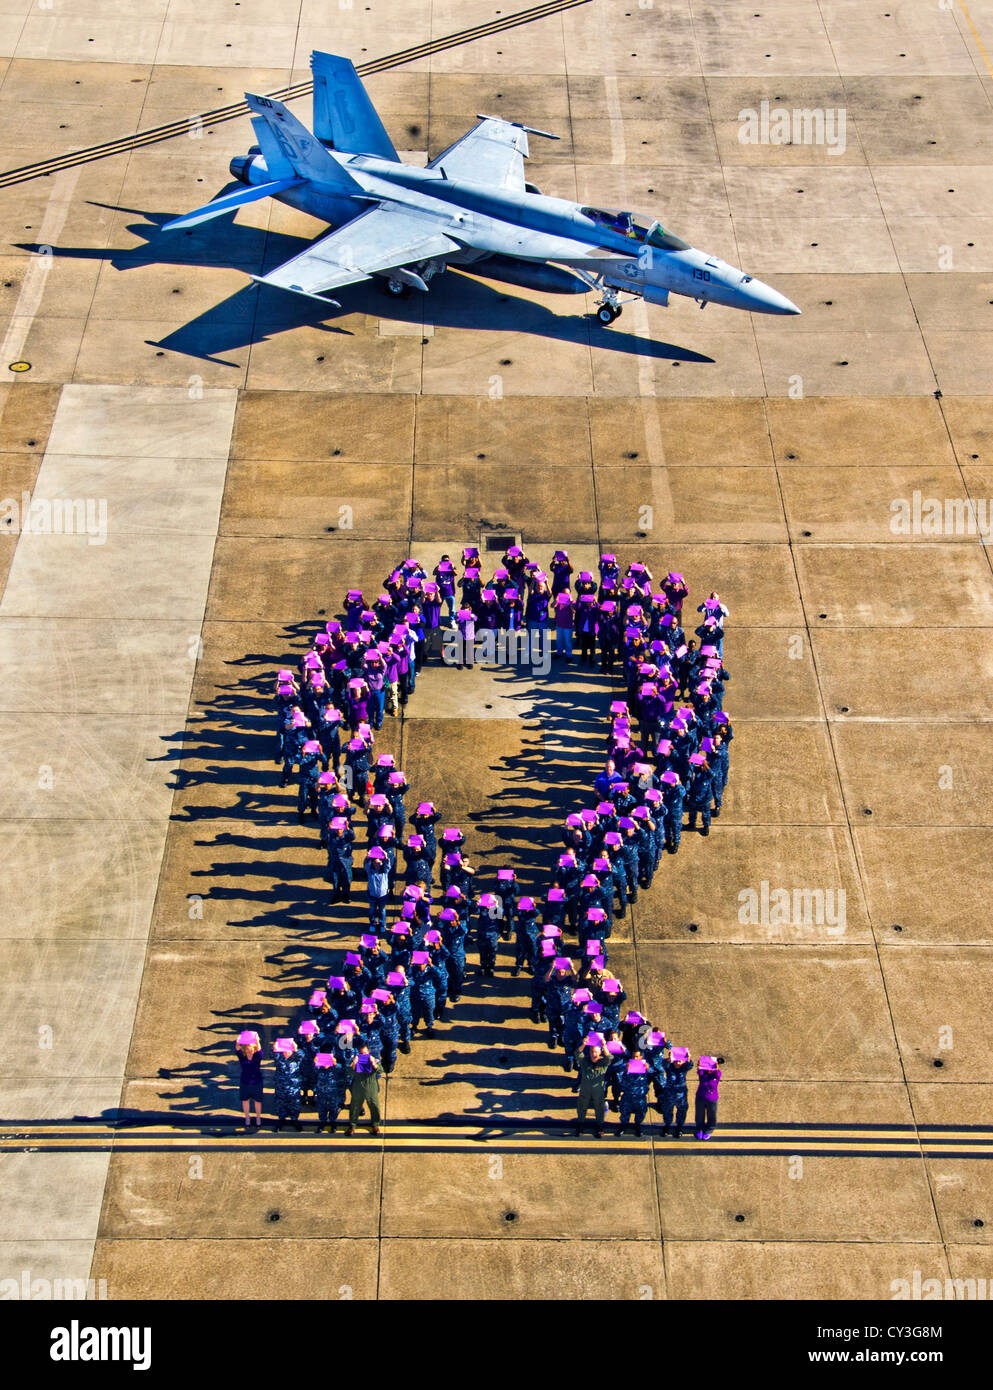 Approximately 150 active duty and civilian volunteers form a purple ribbon, the symbol for domestic violence awareness on the flightline at Naval Air Station Oceana in observance of domestic violence awareness month October 12, 2012 in Virginia Beach, Virginia. October has been National Domestic Violence Awareness Month since it evolved from the first Day of Unity observed in October 1981. Stock Photo